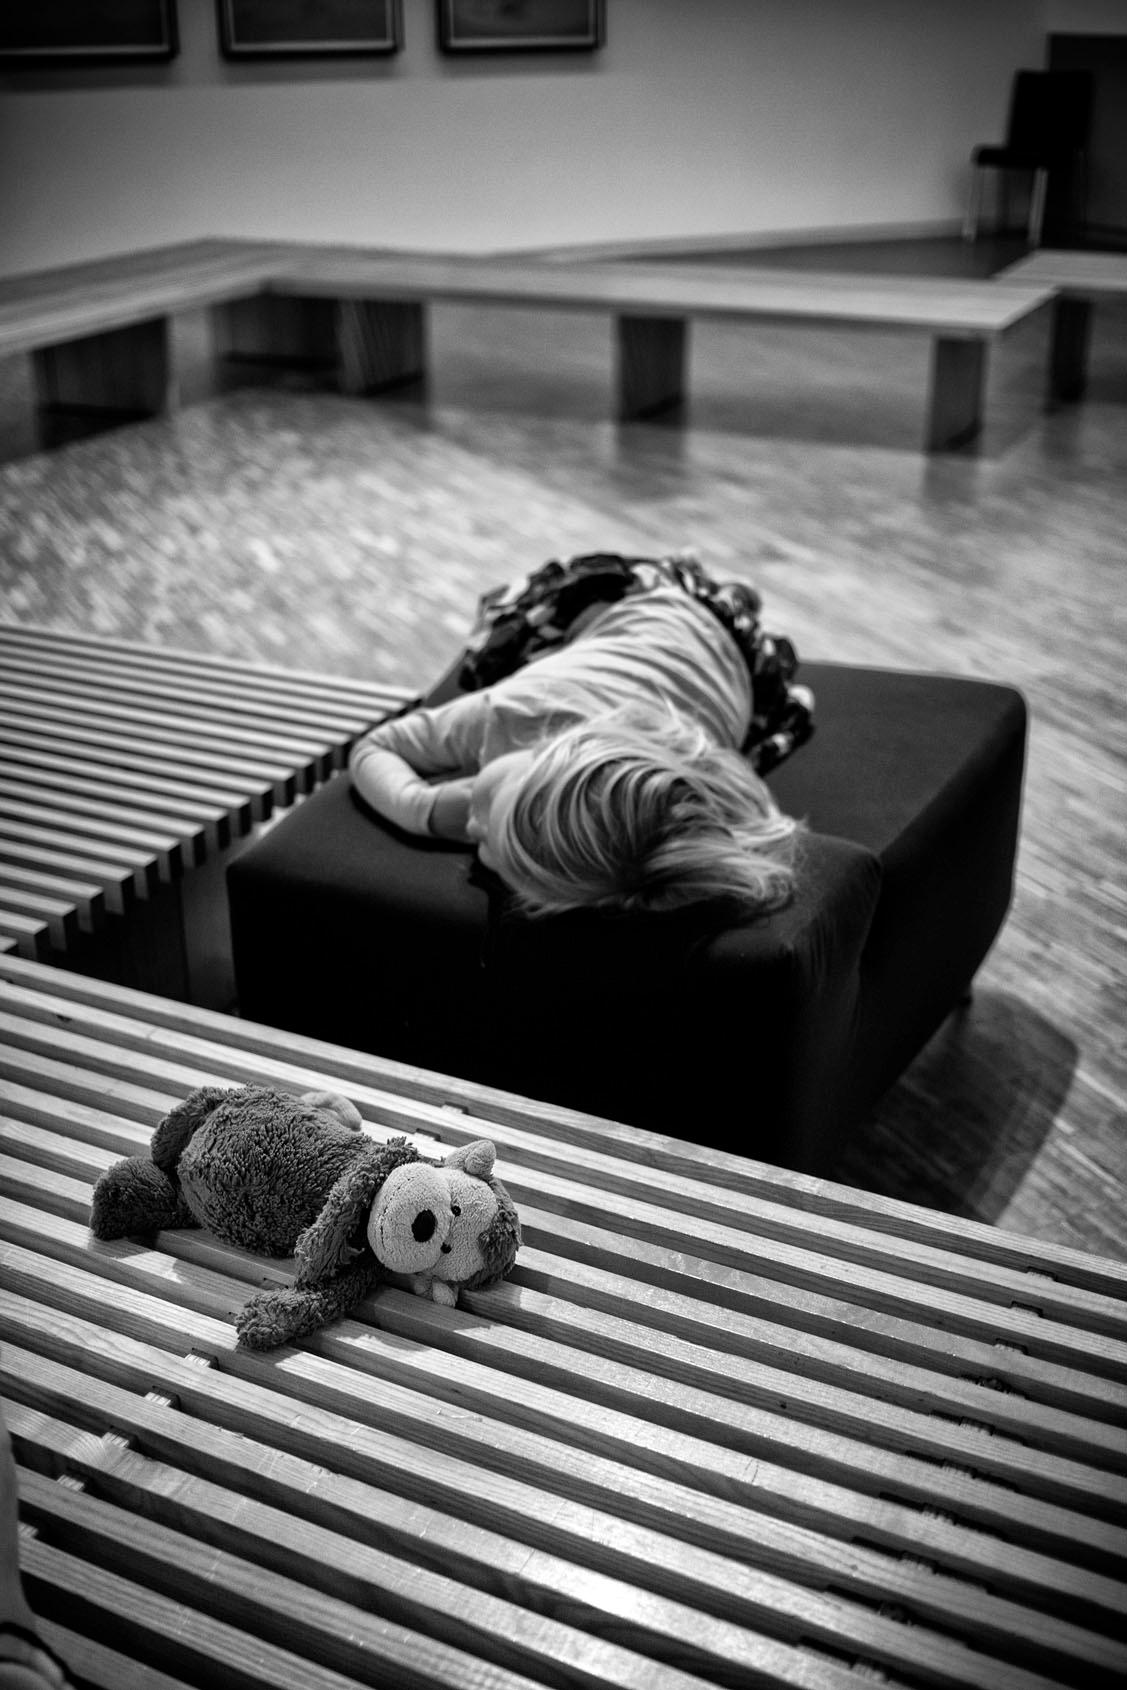 Gérard Uféras Black and White Photograph - A Day in the museum - child lying on the sofa with teddy bear